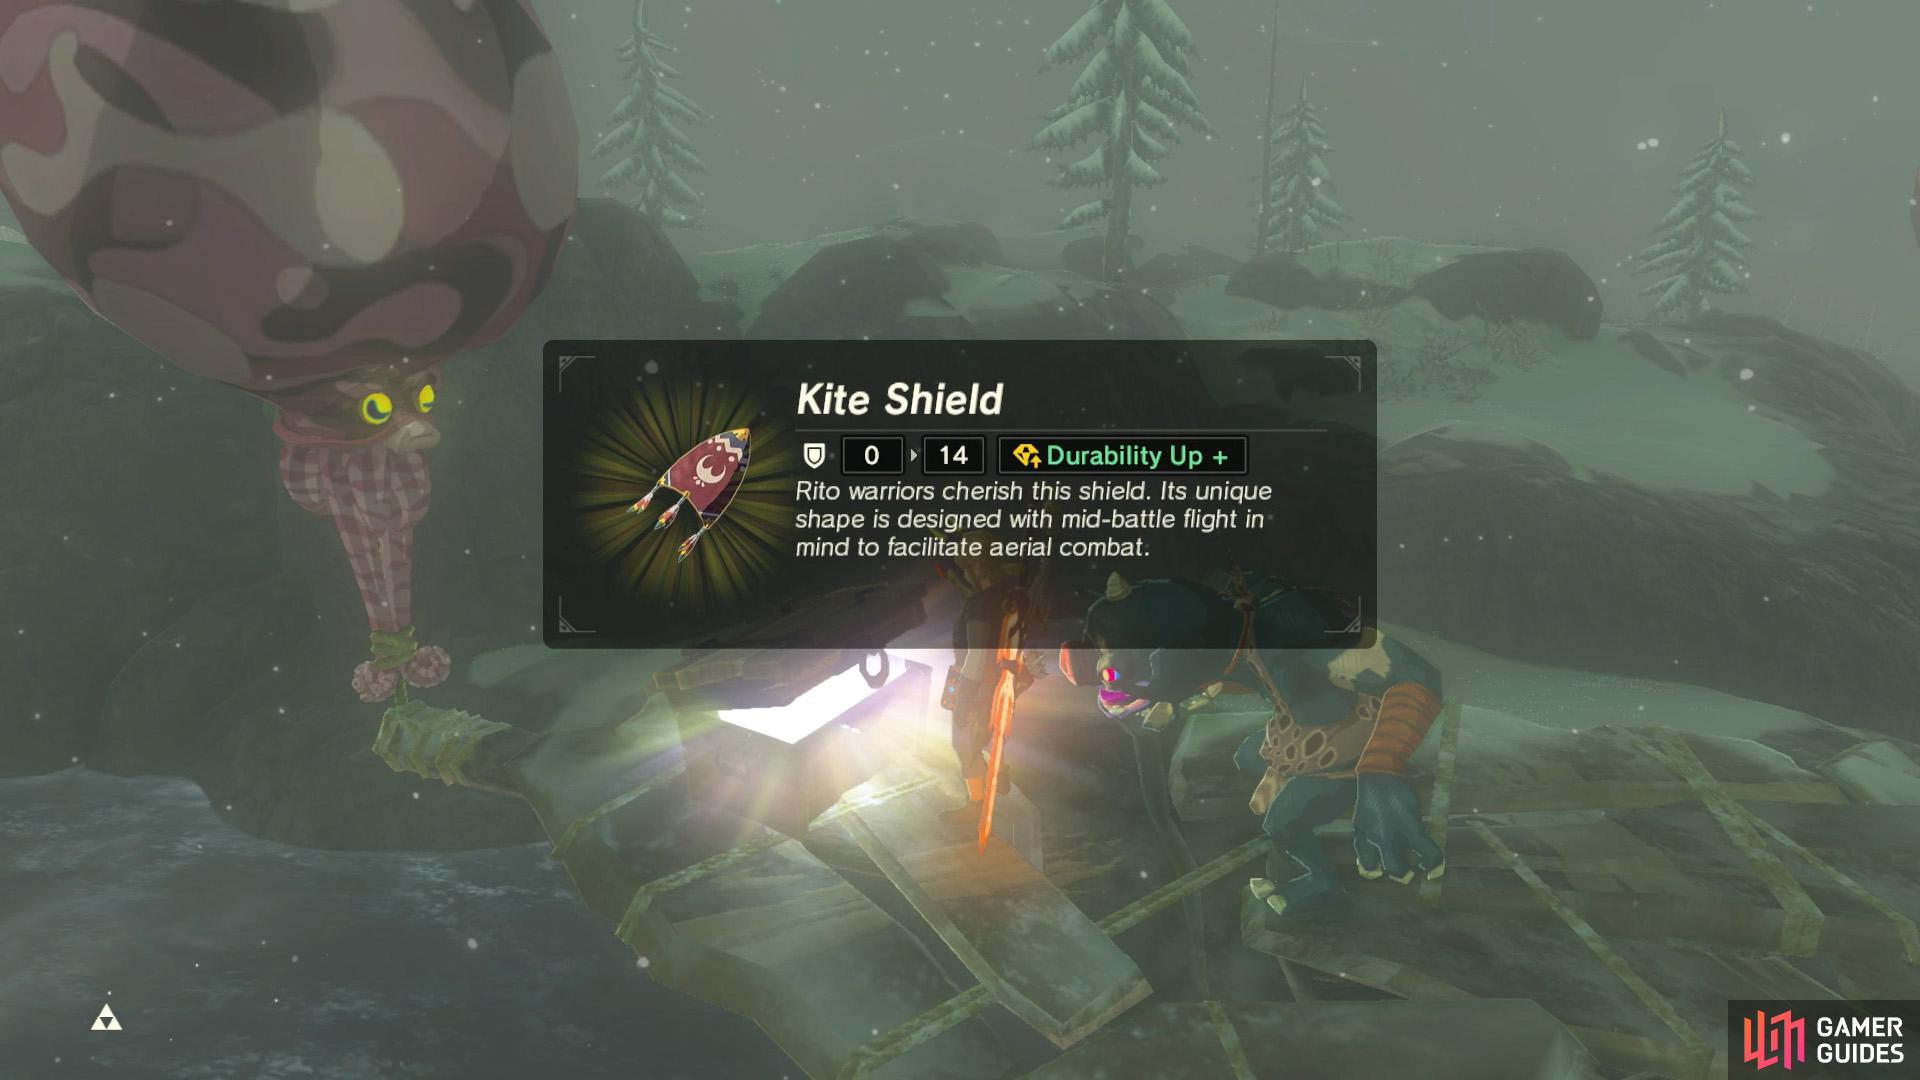 Anyway, there's a Kite Shield stashed inside the chest.